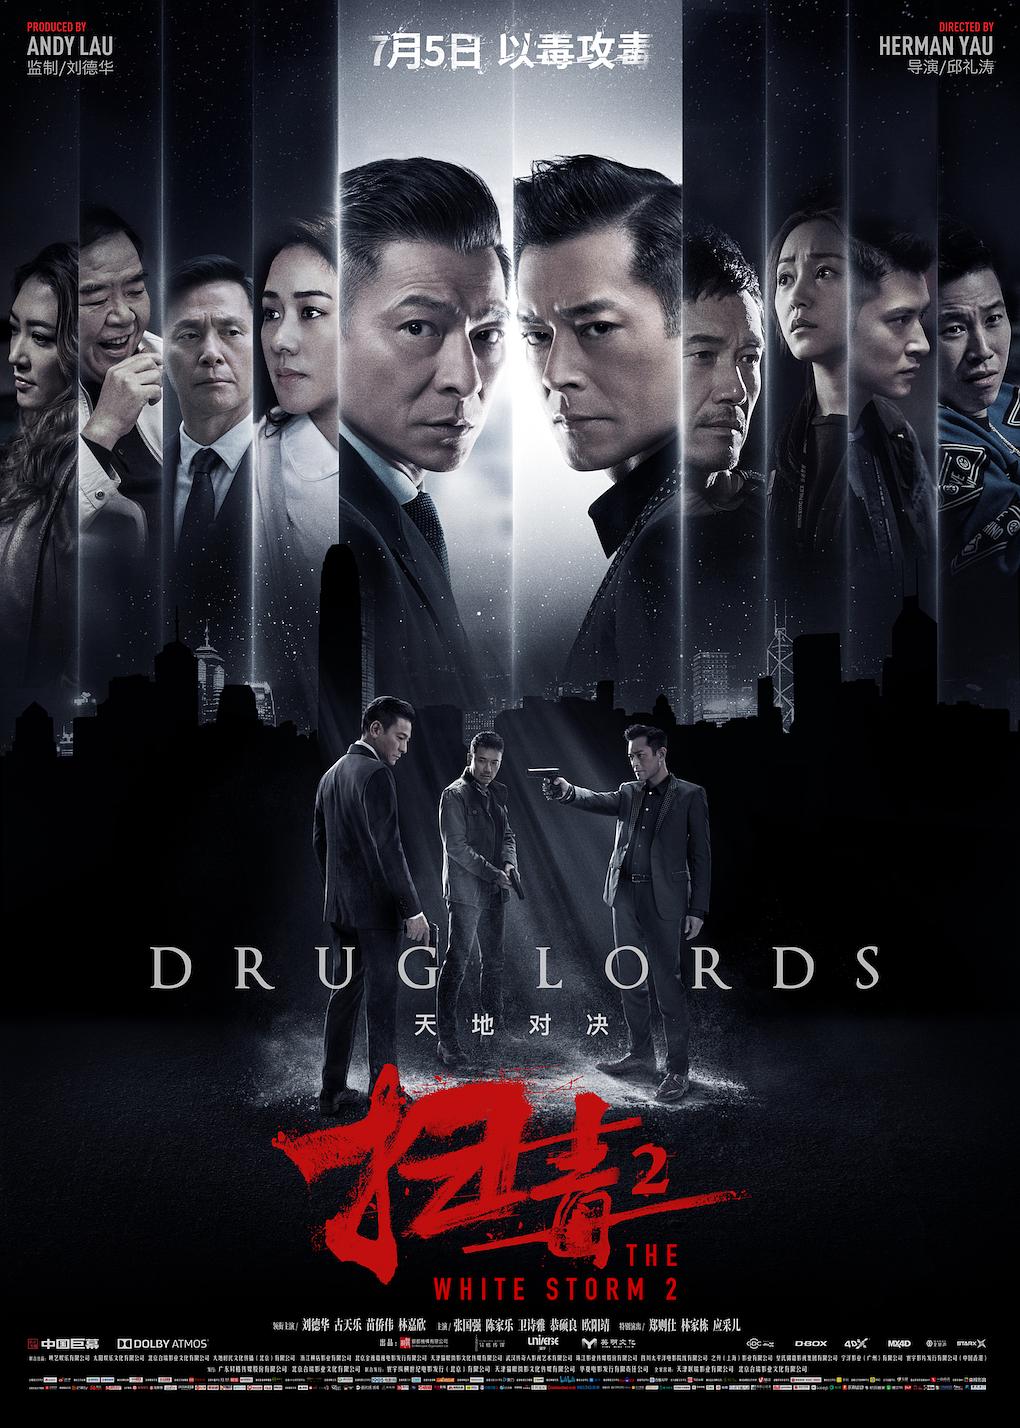 ߶2:،Q The.White.Storm.2.Drug.Lords.2019.CHINESE.720p.BluRay.X264-WiKi 5.61GB-1.png